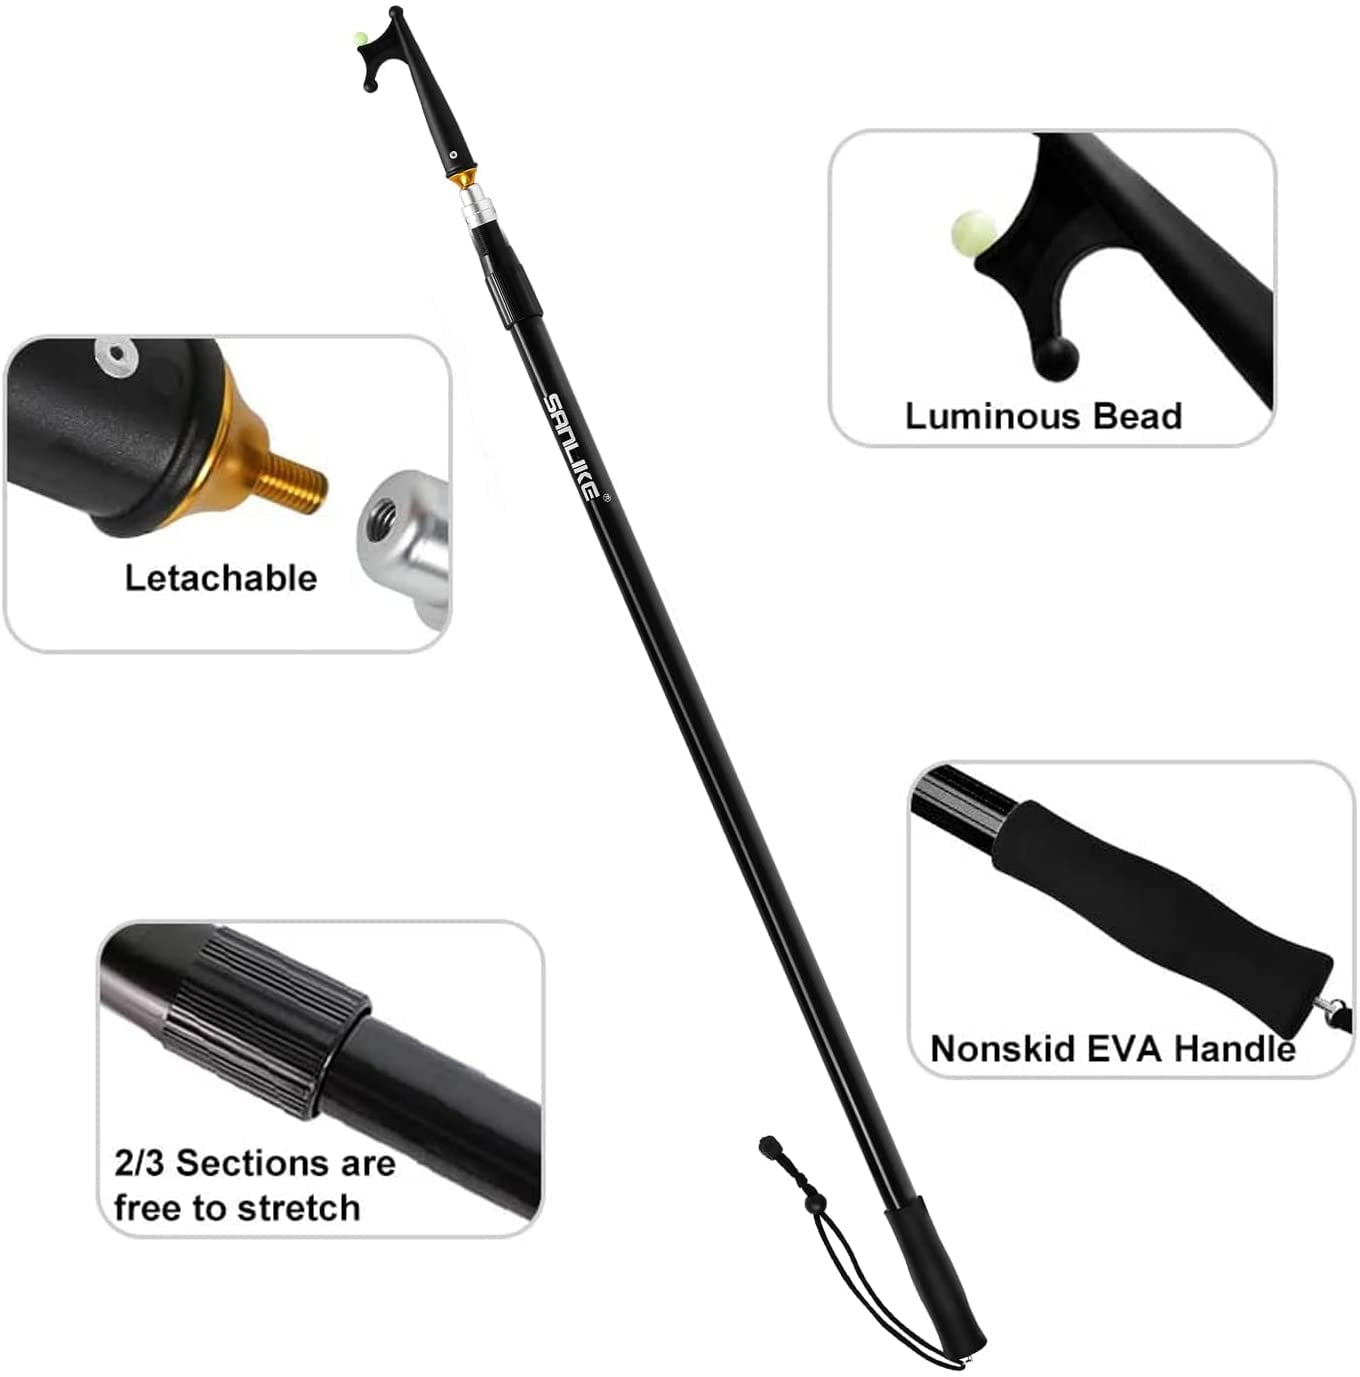 SAN LIKE Telescoping Boat Hooks Adjustable Boat Push Pole - Dock Pole  Floating,Durable,Rust-Resistant with Luminous Bead Push Pole for Docking  Extends from 2Ft to 4.72Ft & Blue 